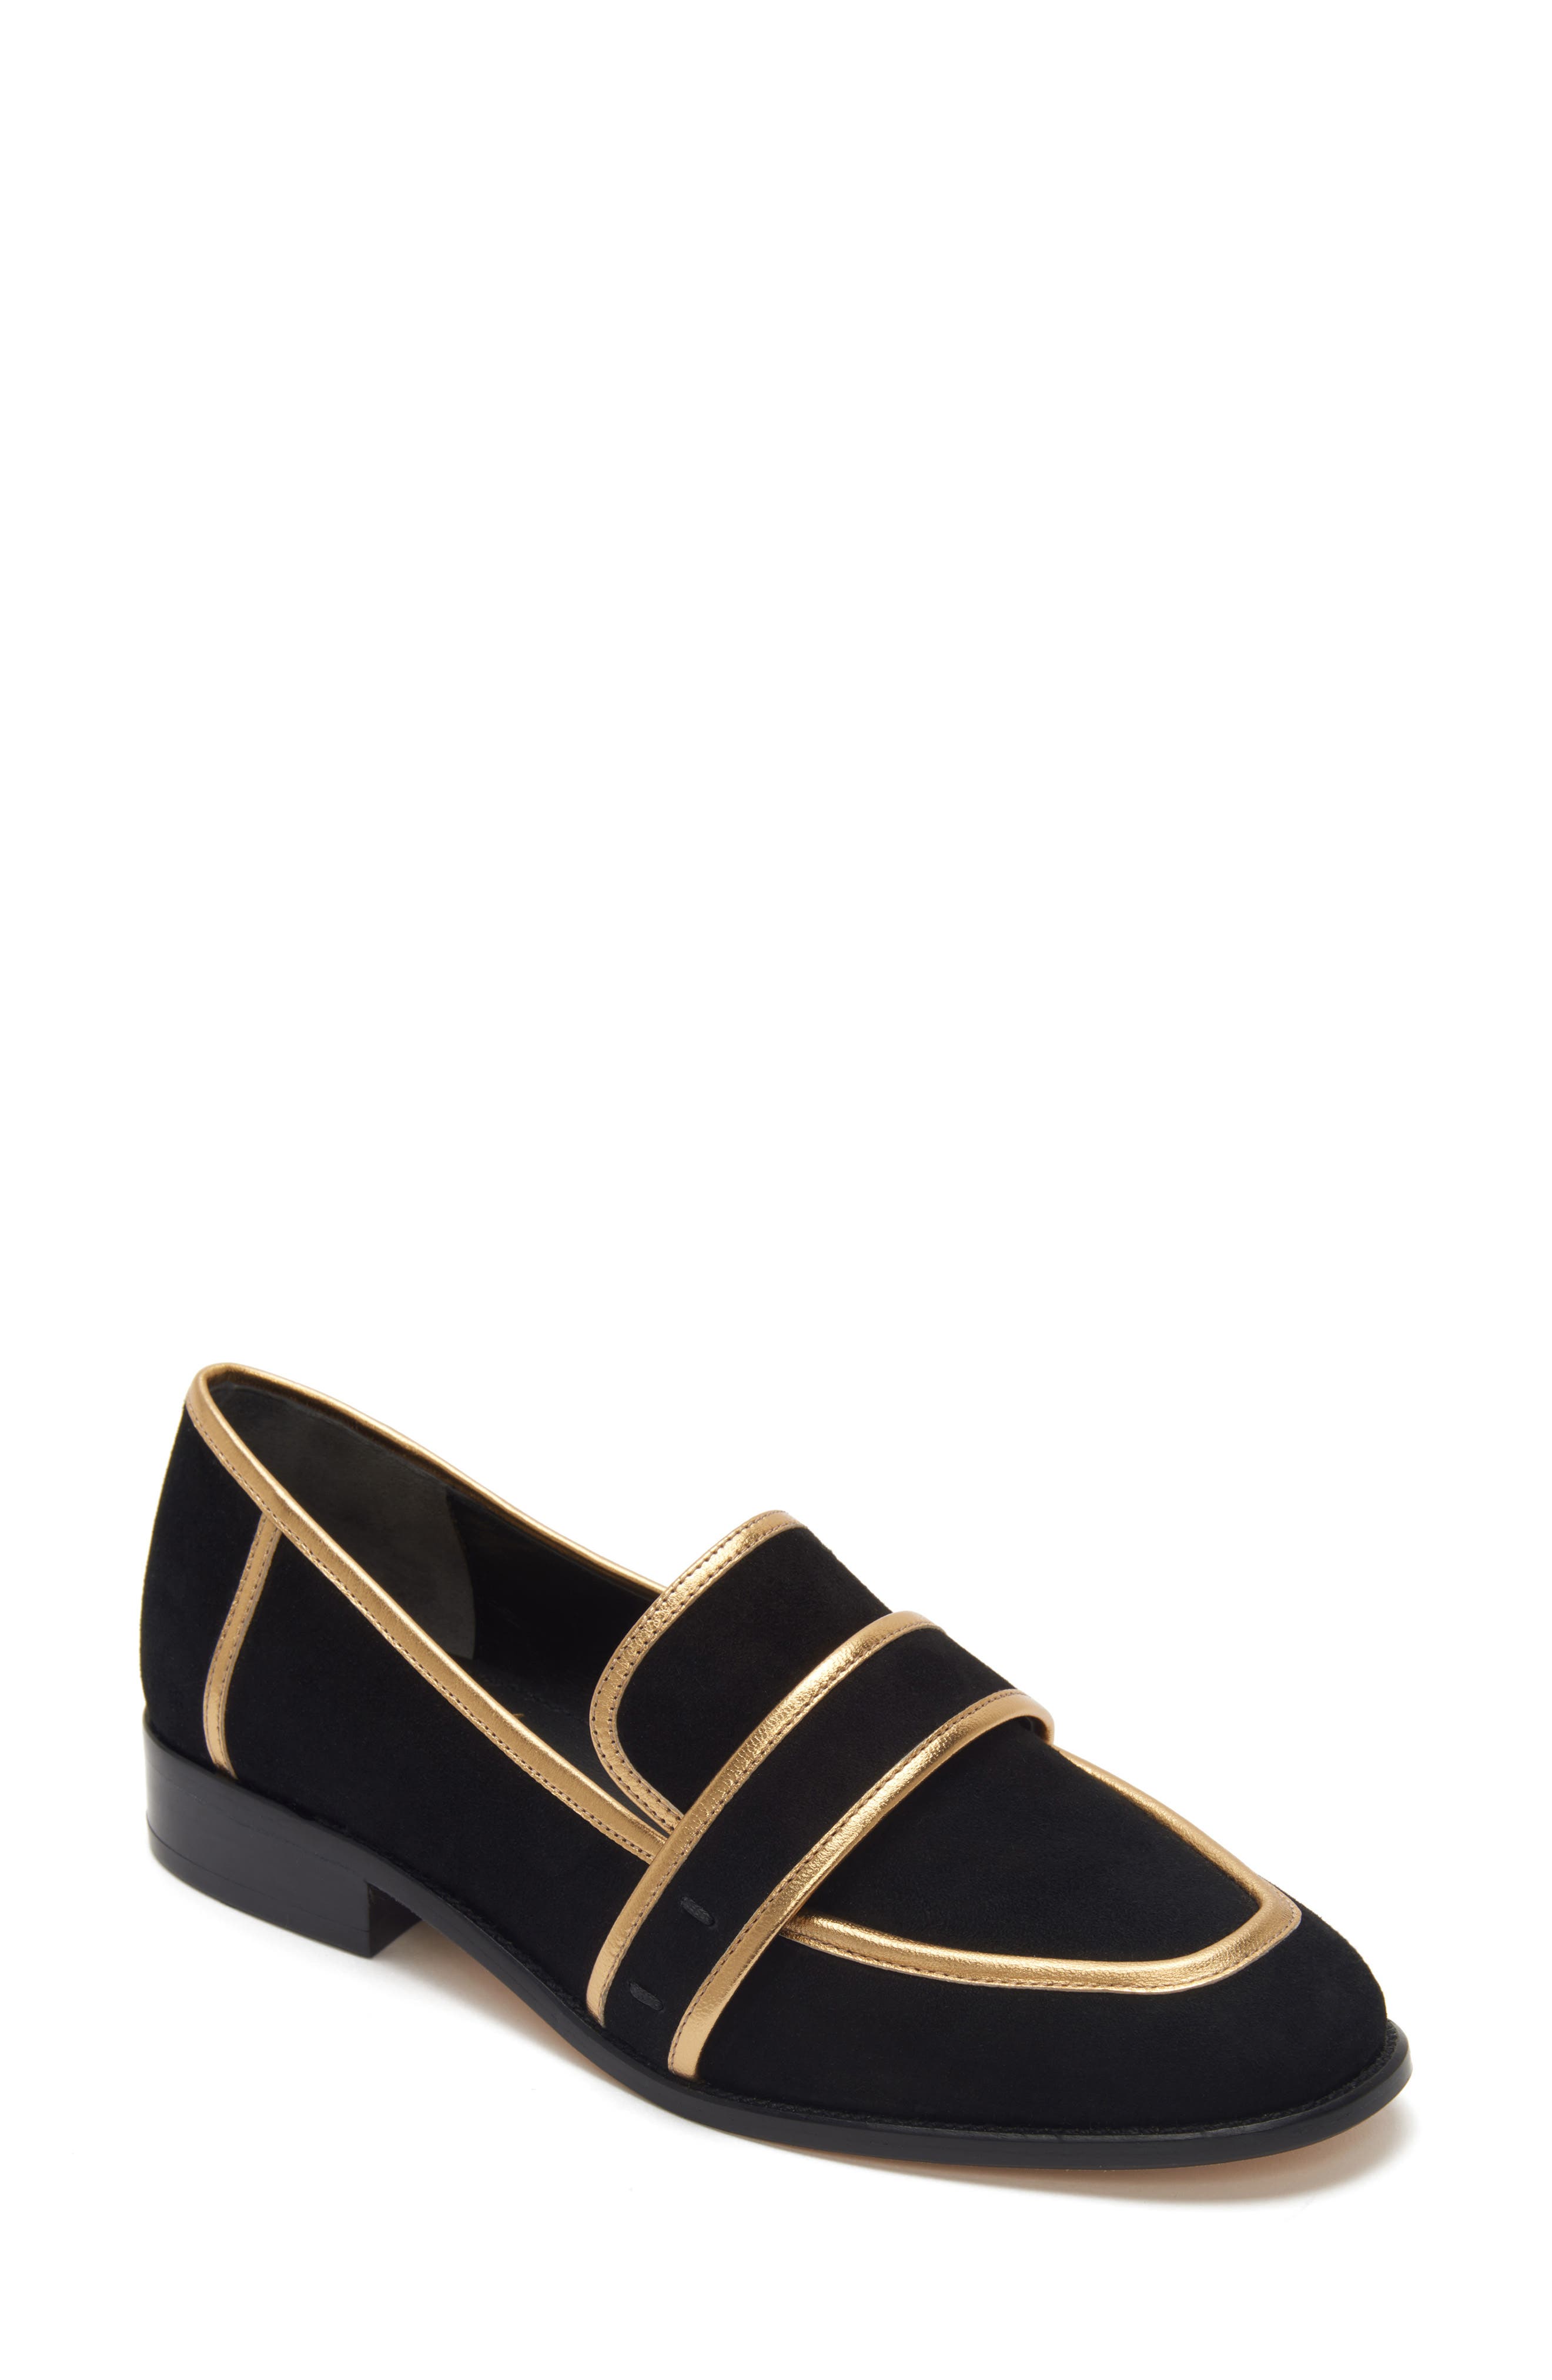 etienne aigner loafers